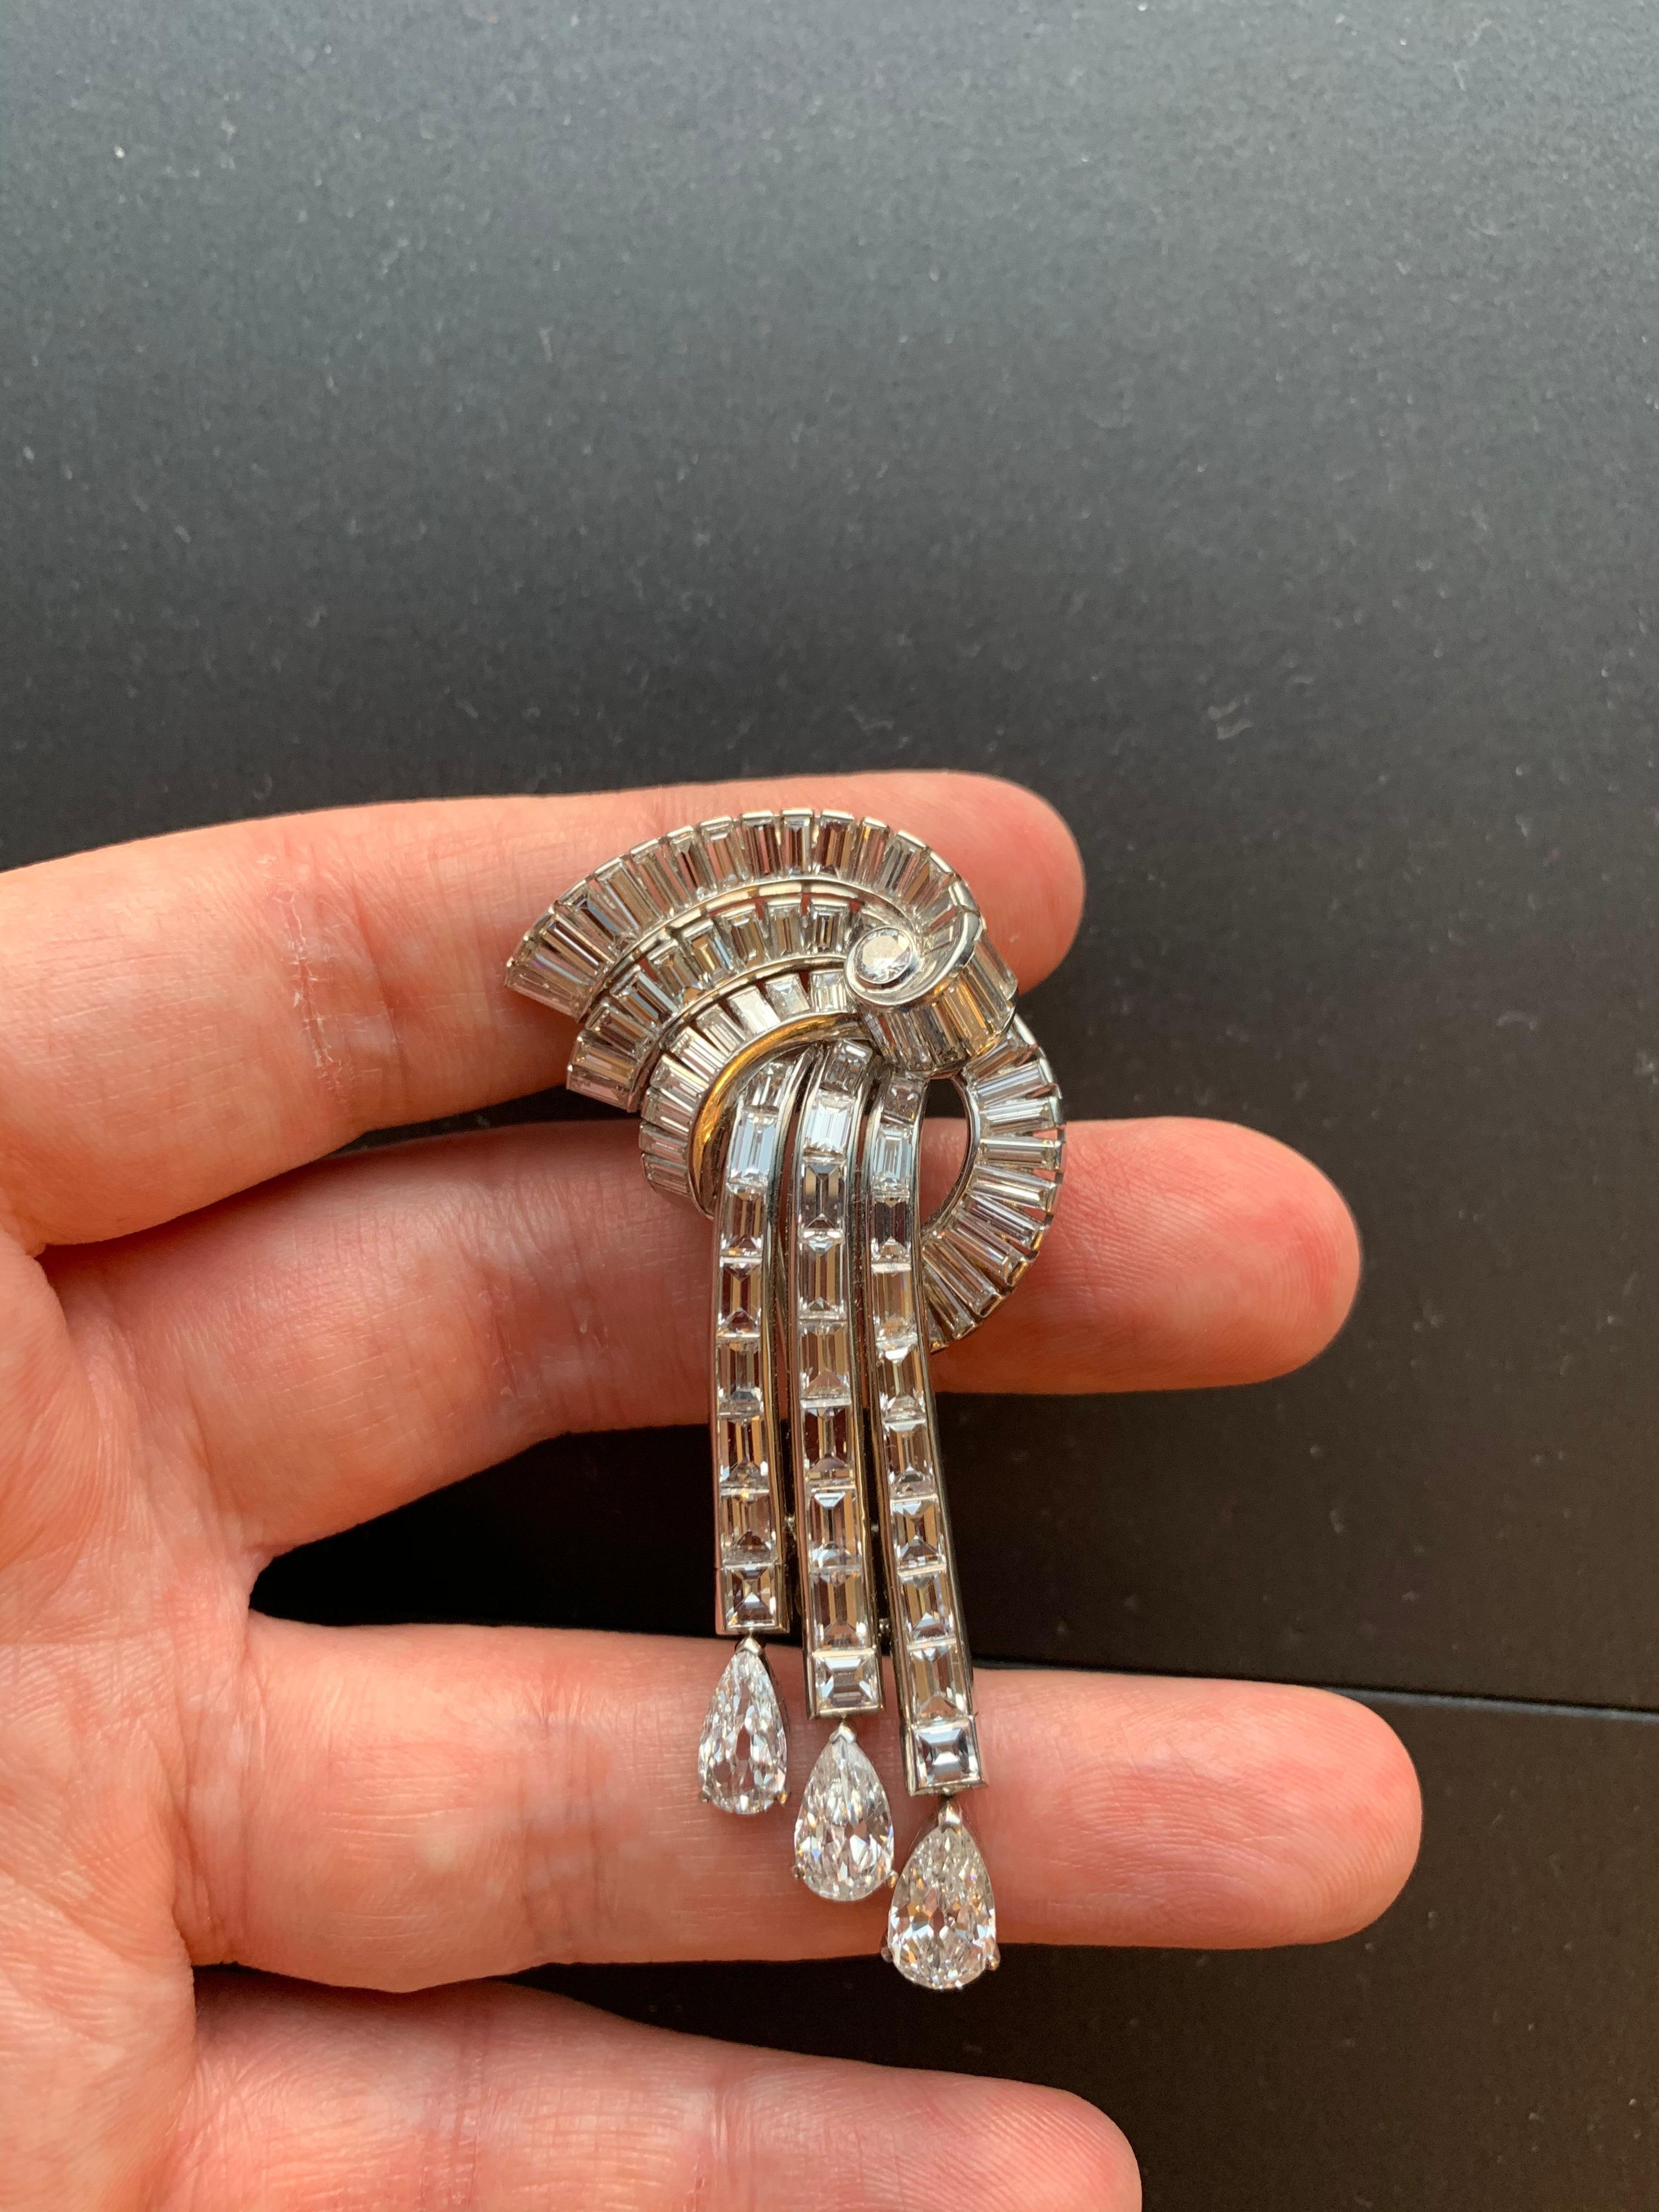 1950's Cascade Diamond Brooch
Approx 13 ct diamonds,. G-H color. VS1 clarity.
2.6 inches long
1 inch wide at its widest
Engraved with unidentified serial numbers
Sterle-esque